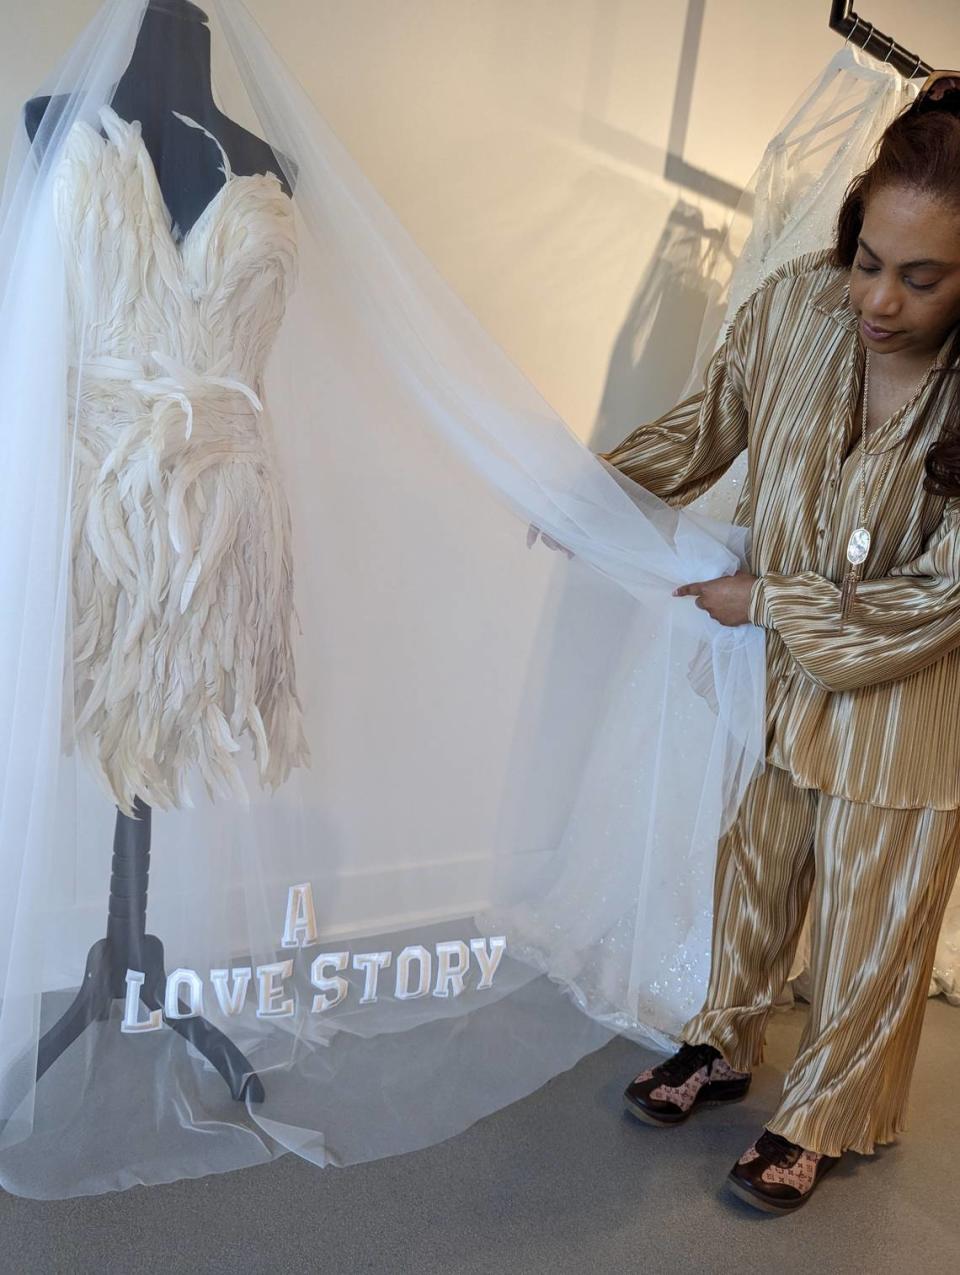 Tracie Mackins hold out a veil showing a veil customized saying “A Love Story” at the Mackins Bridal Boutique in Charlotte.